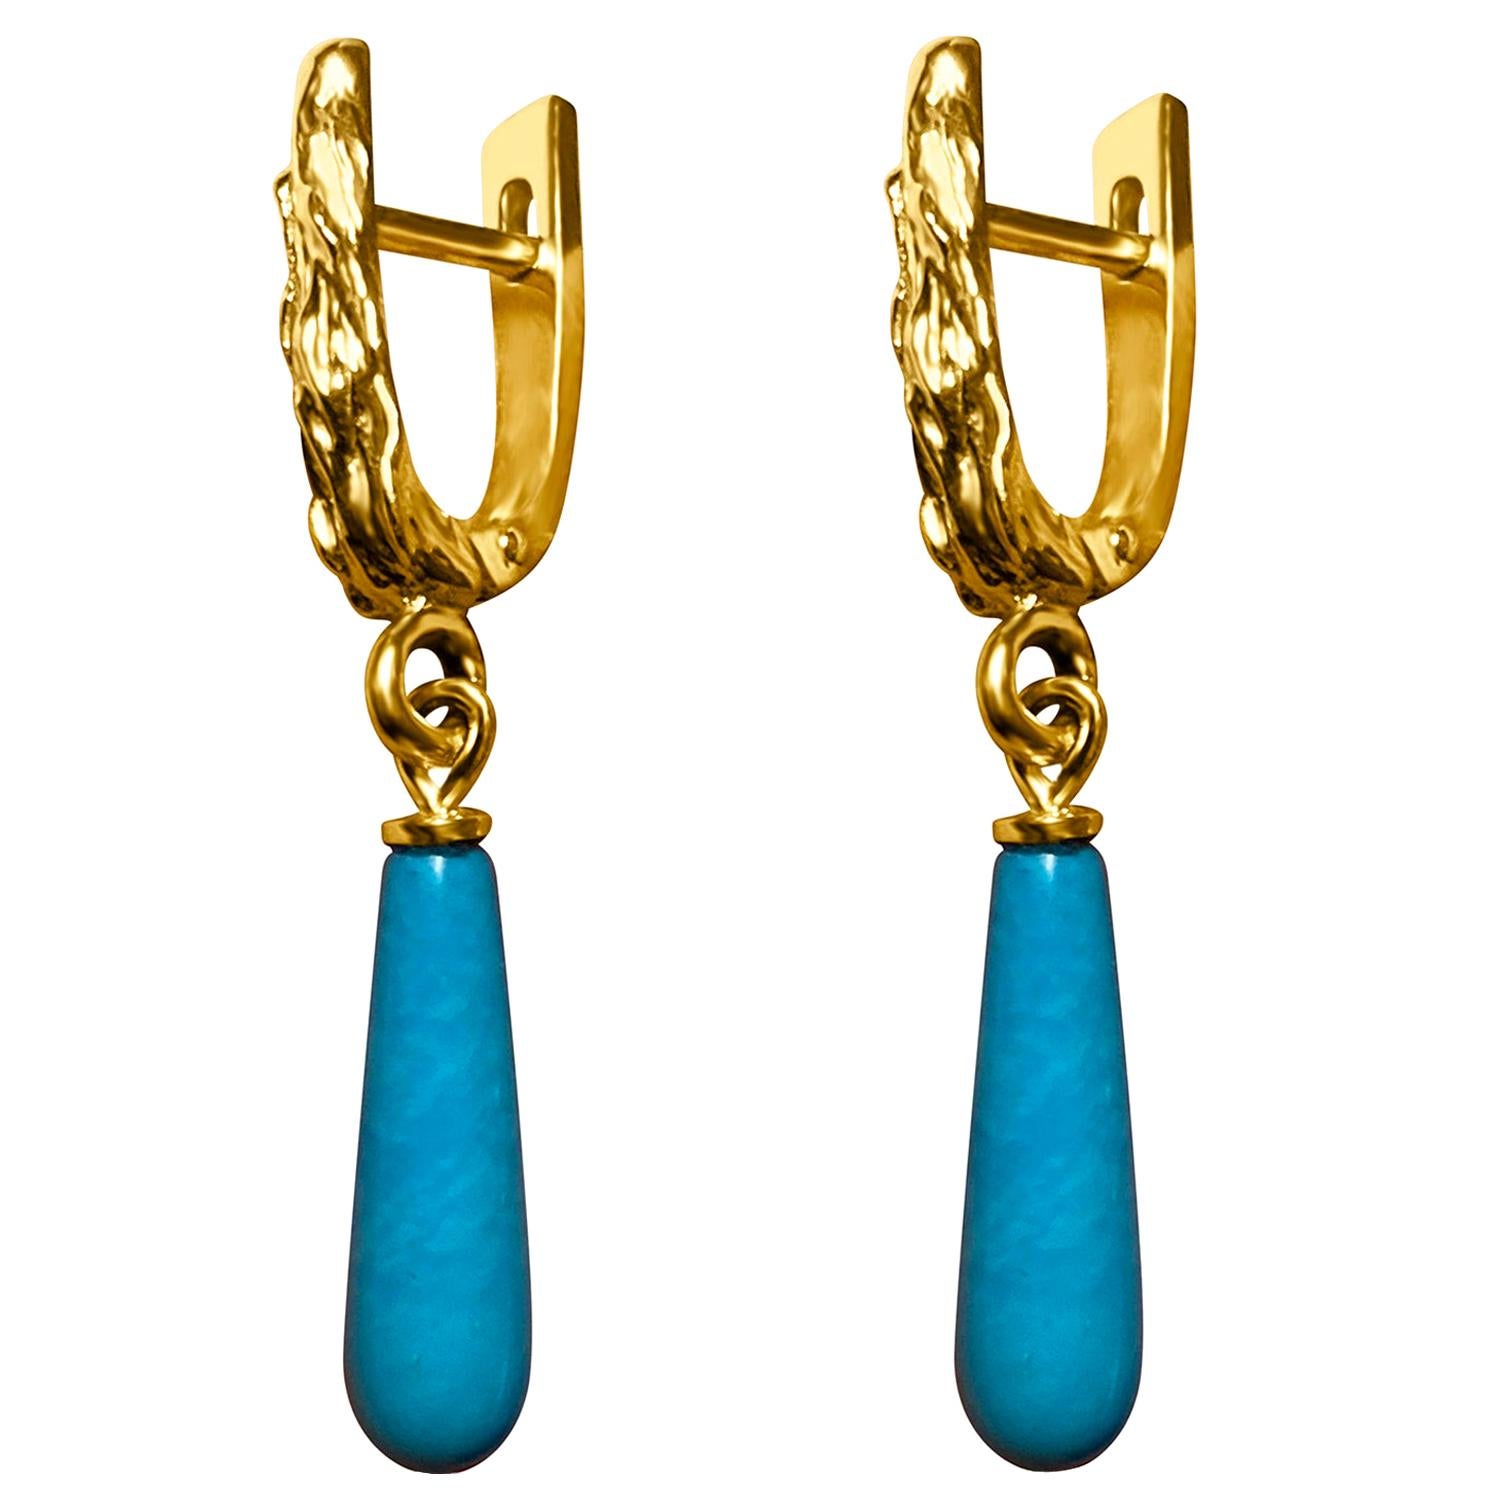 14K yellow gold earrings with natural pear shaped Sleeping beauty Turquoise
turquoise origin - Arizona, United States
gem size is 0.2 х 0.47 in / 5 х 12 mm
earrings weight - 5.19 grams
earrings height - 1.61 in / 41 mm


We ship our jewelry